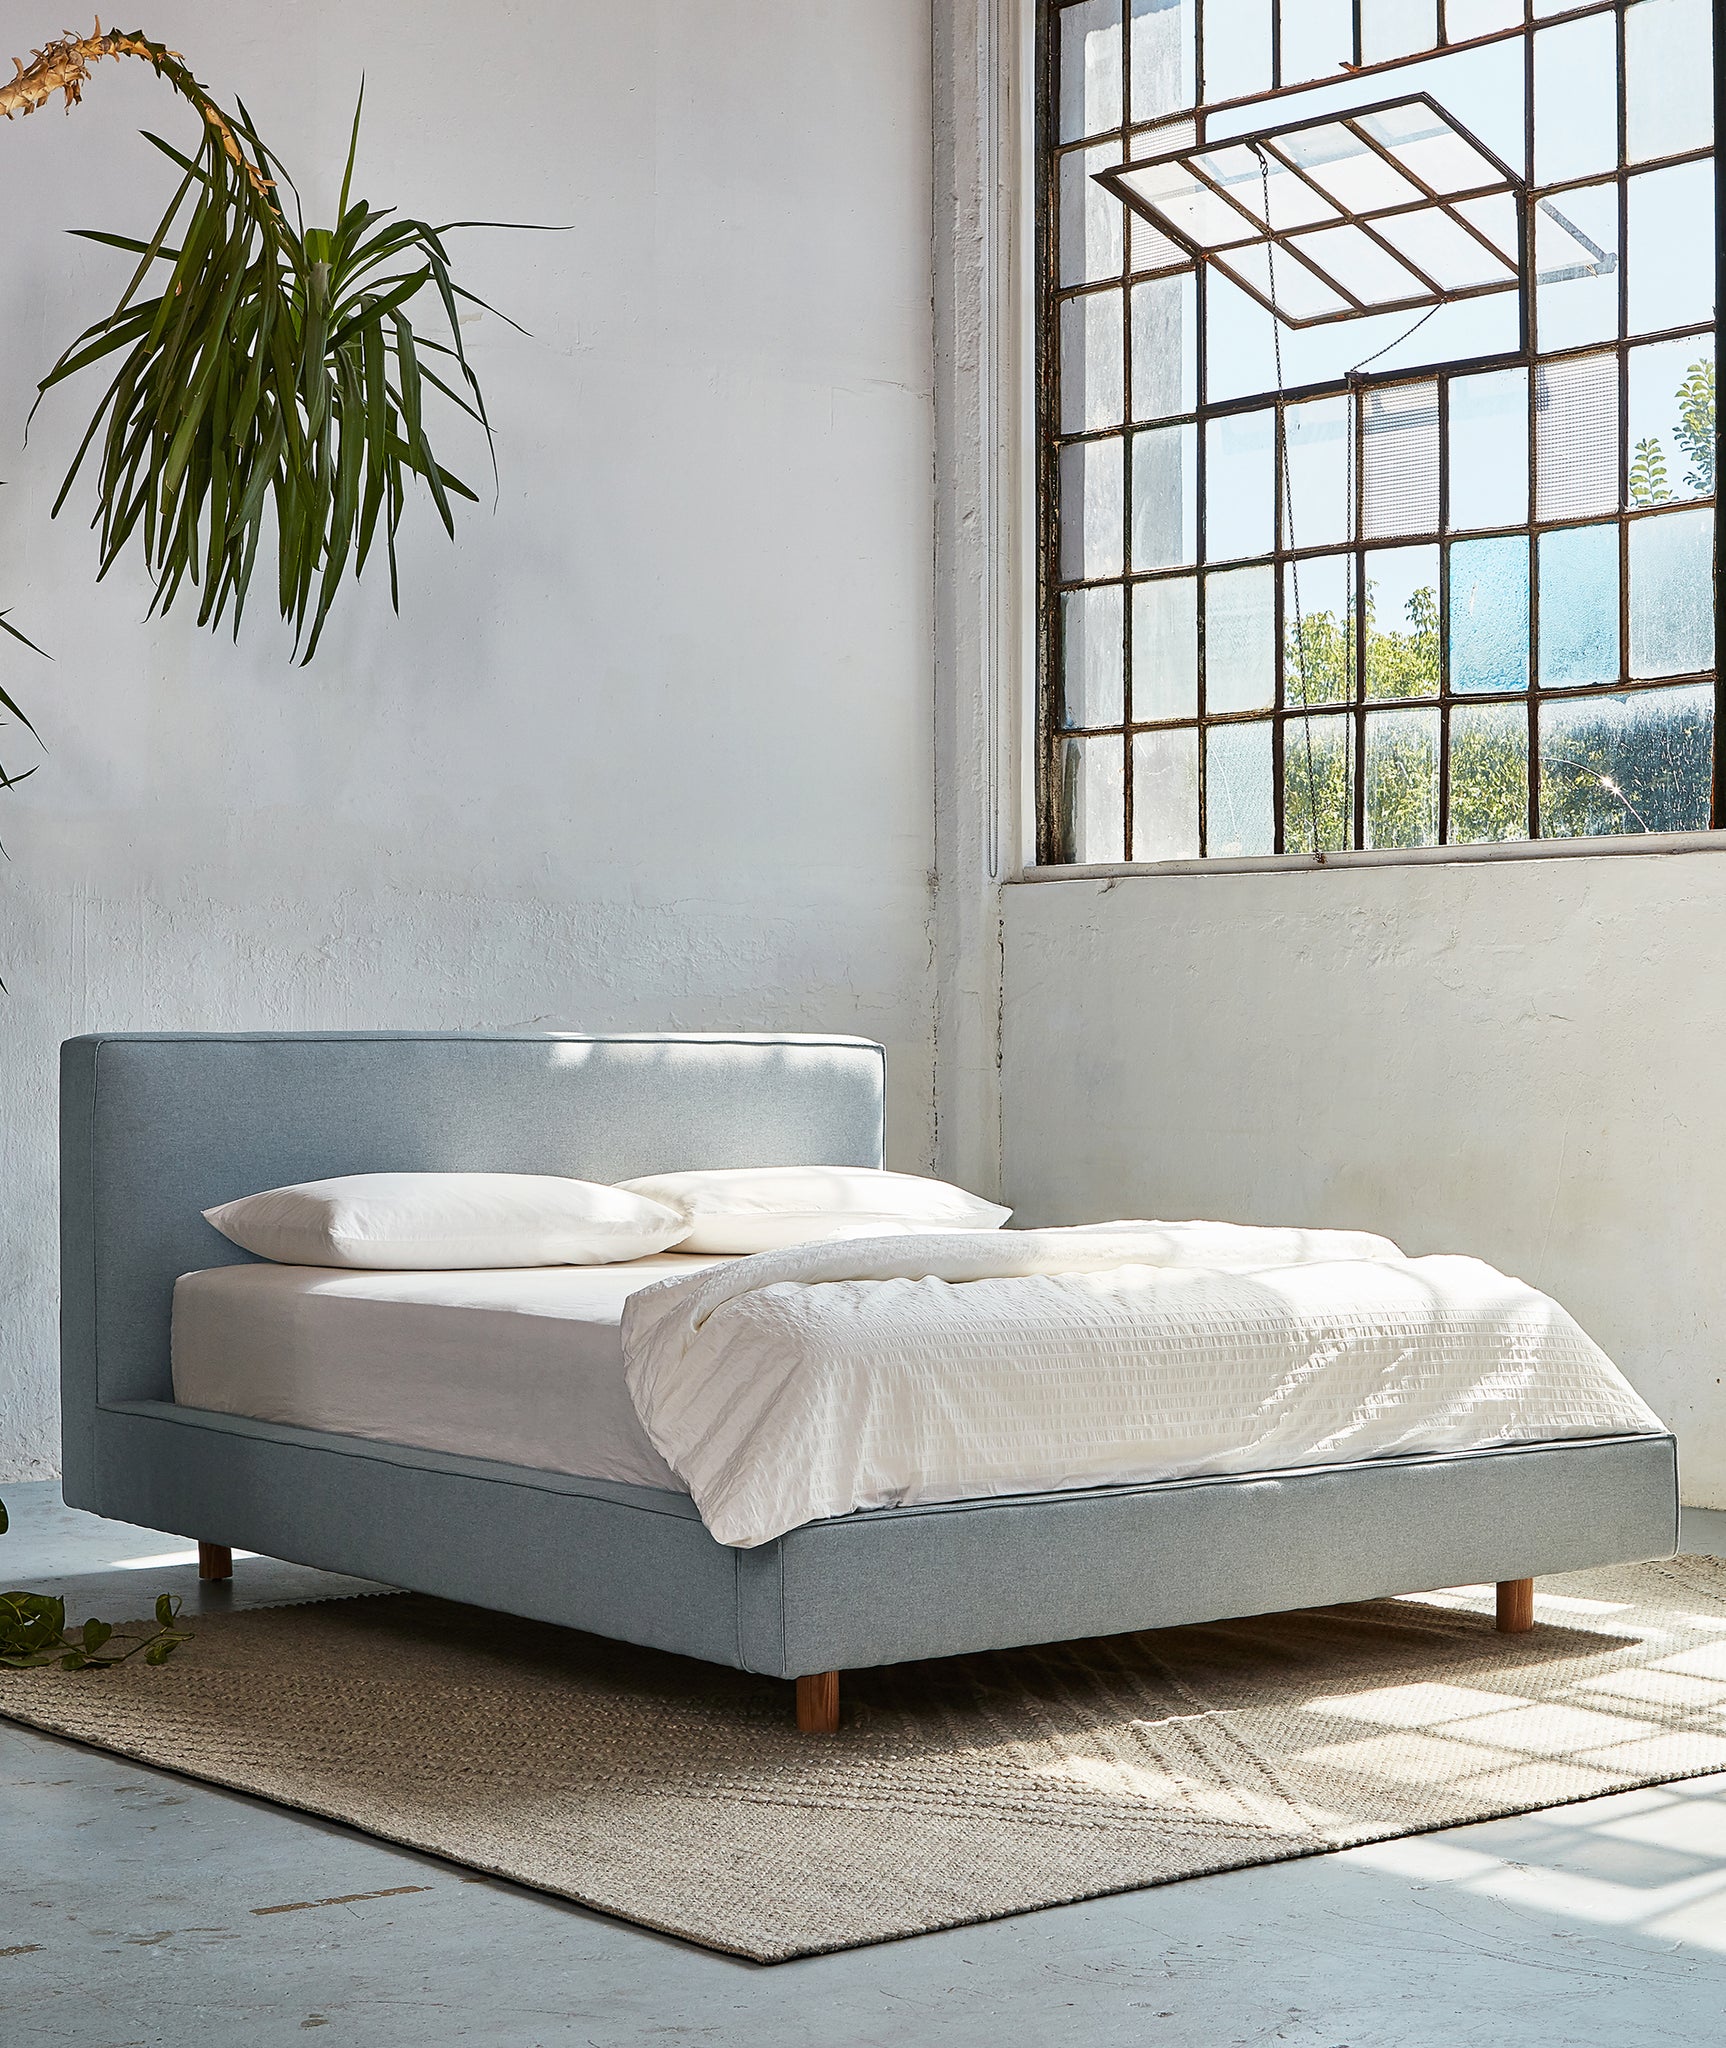 Parcel Bed - 3 Colors Gus* Modern - BEAM // Design Store